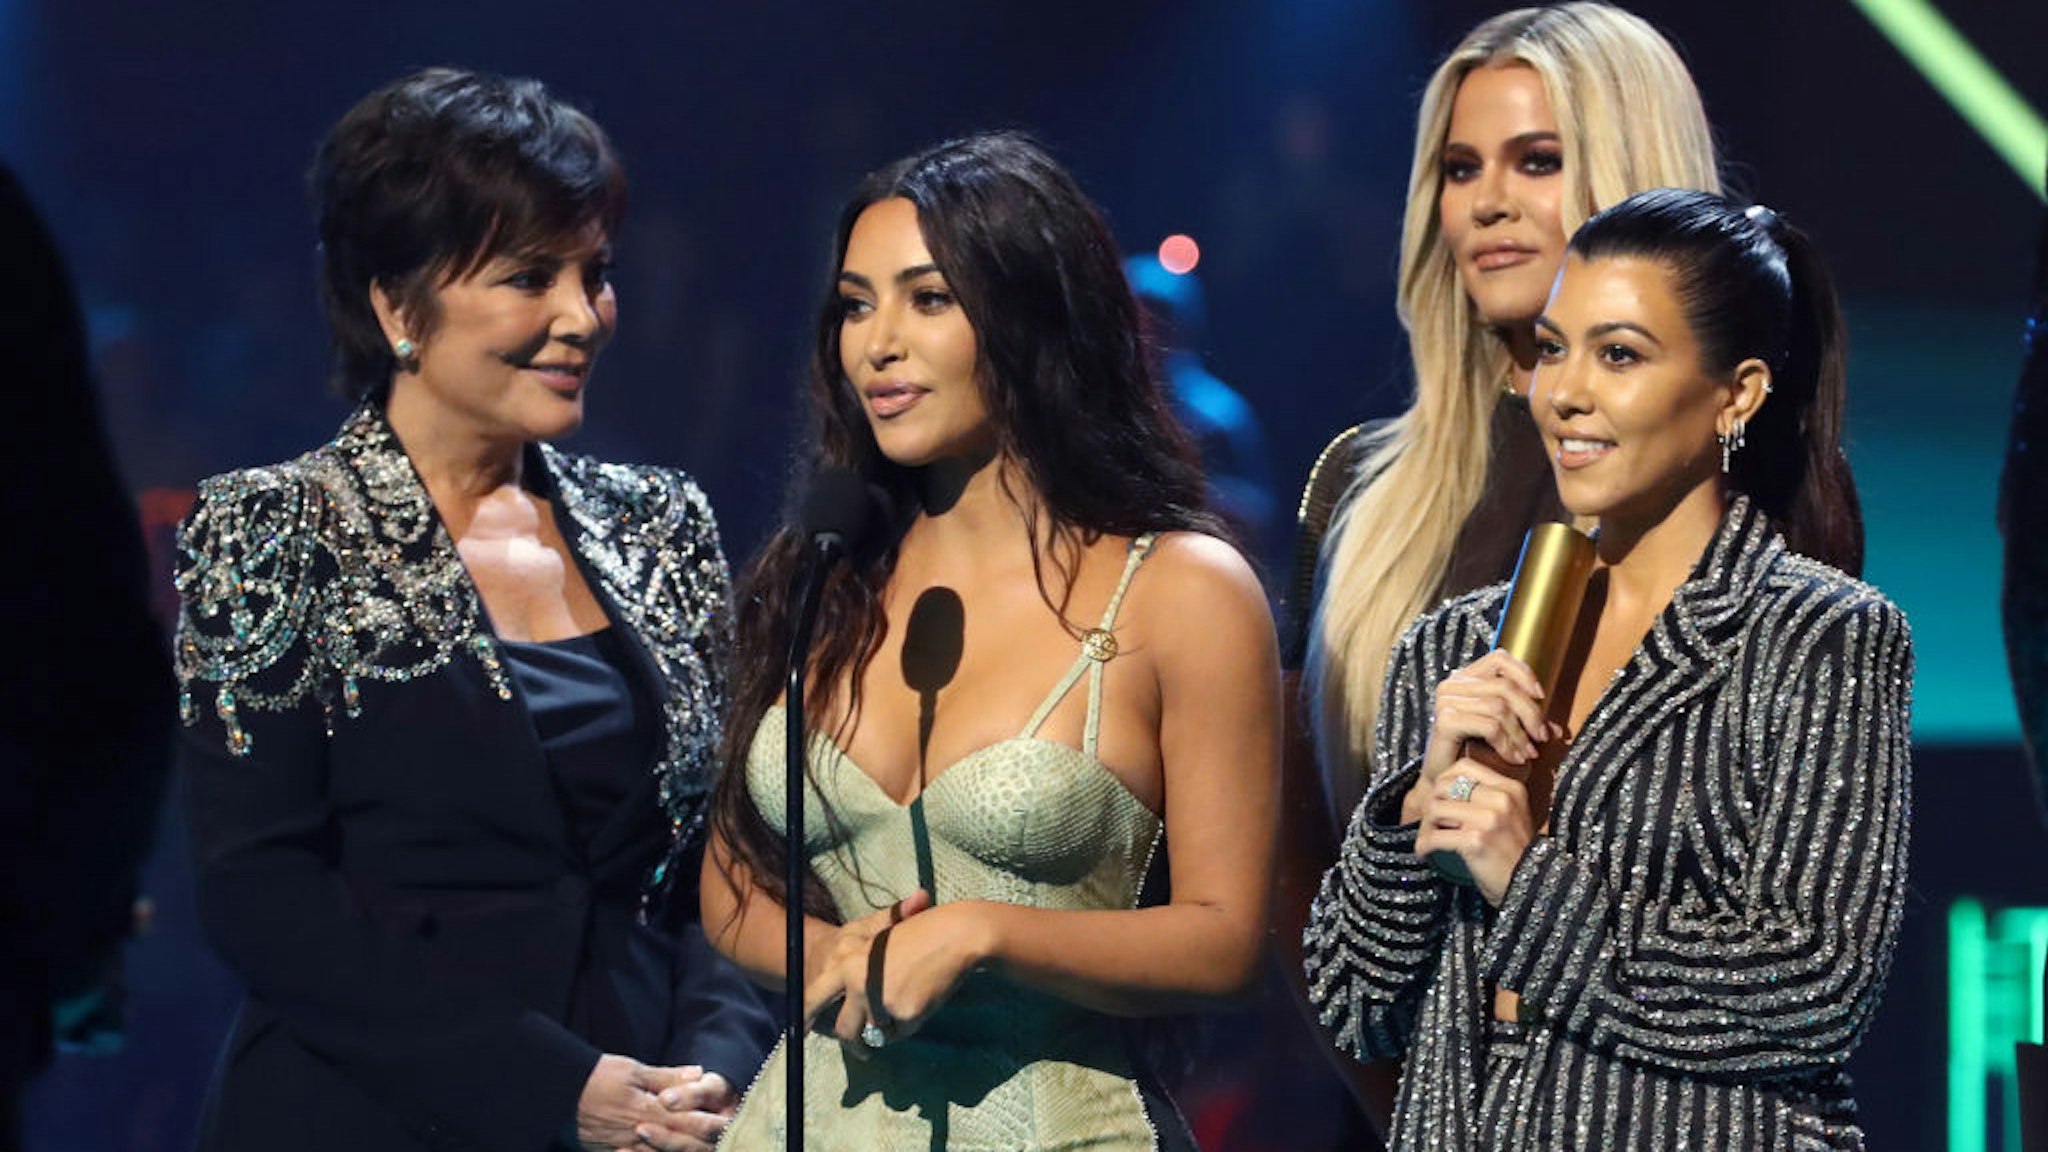 Kris Jenner, Kim Kardashian, Khloé Kardashian, and Kourtney Kardashian accept The Reality Show of 2019 for 'Keeping Up with the Kardashians' on stage during the 2019 E! People's Choice Awards held at the Barker Hangar on November 10, 2019.